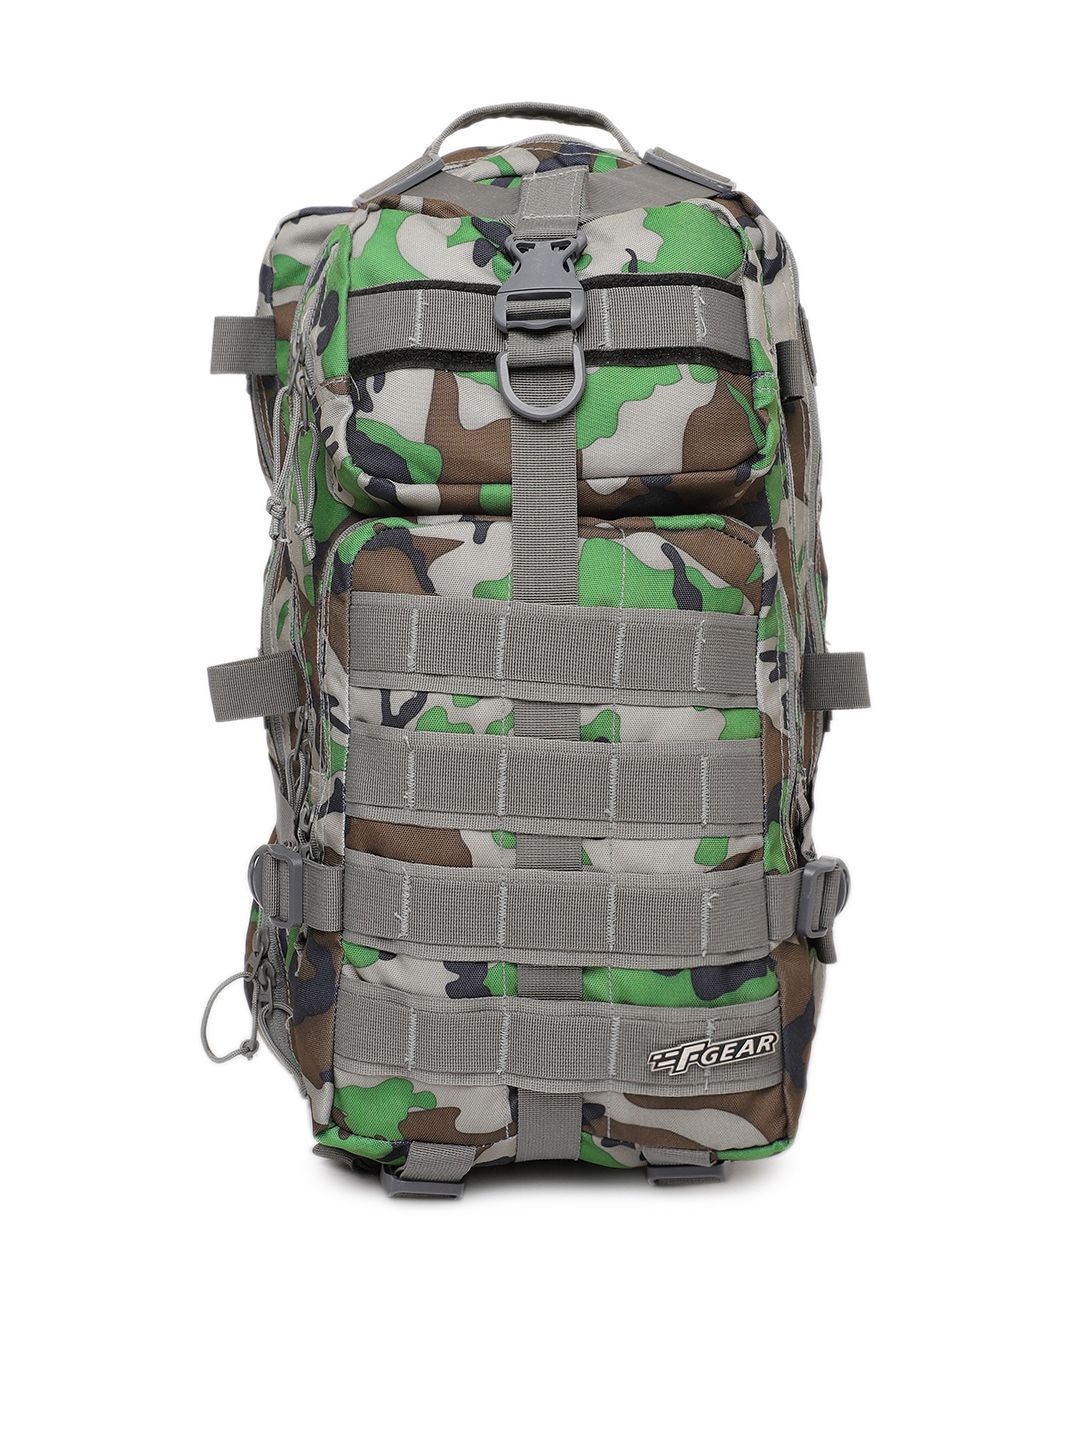 F Gear Unisex Green & Grey Backpack Price in India